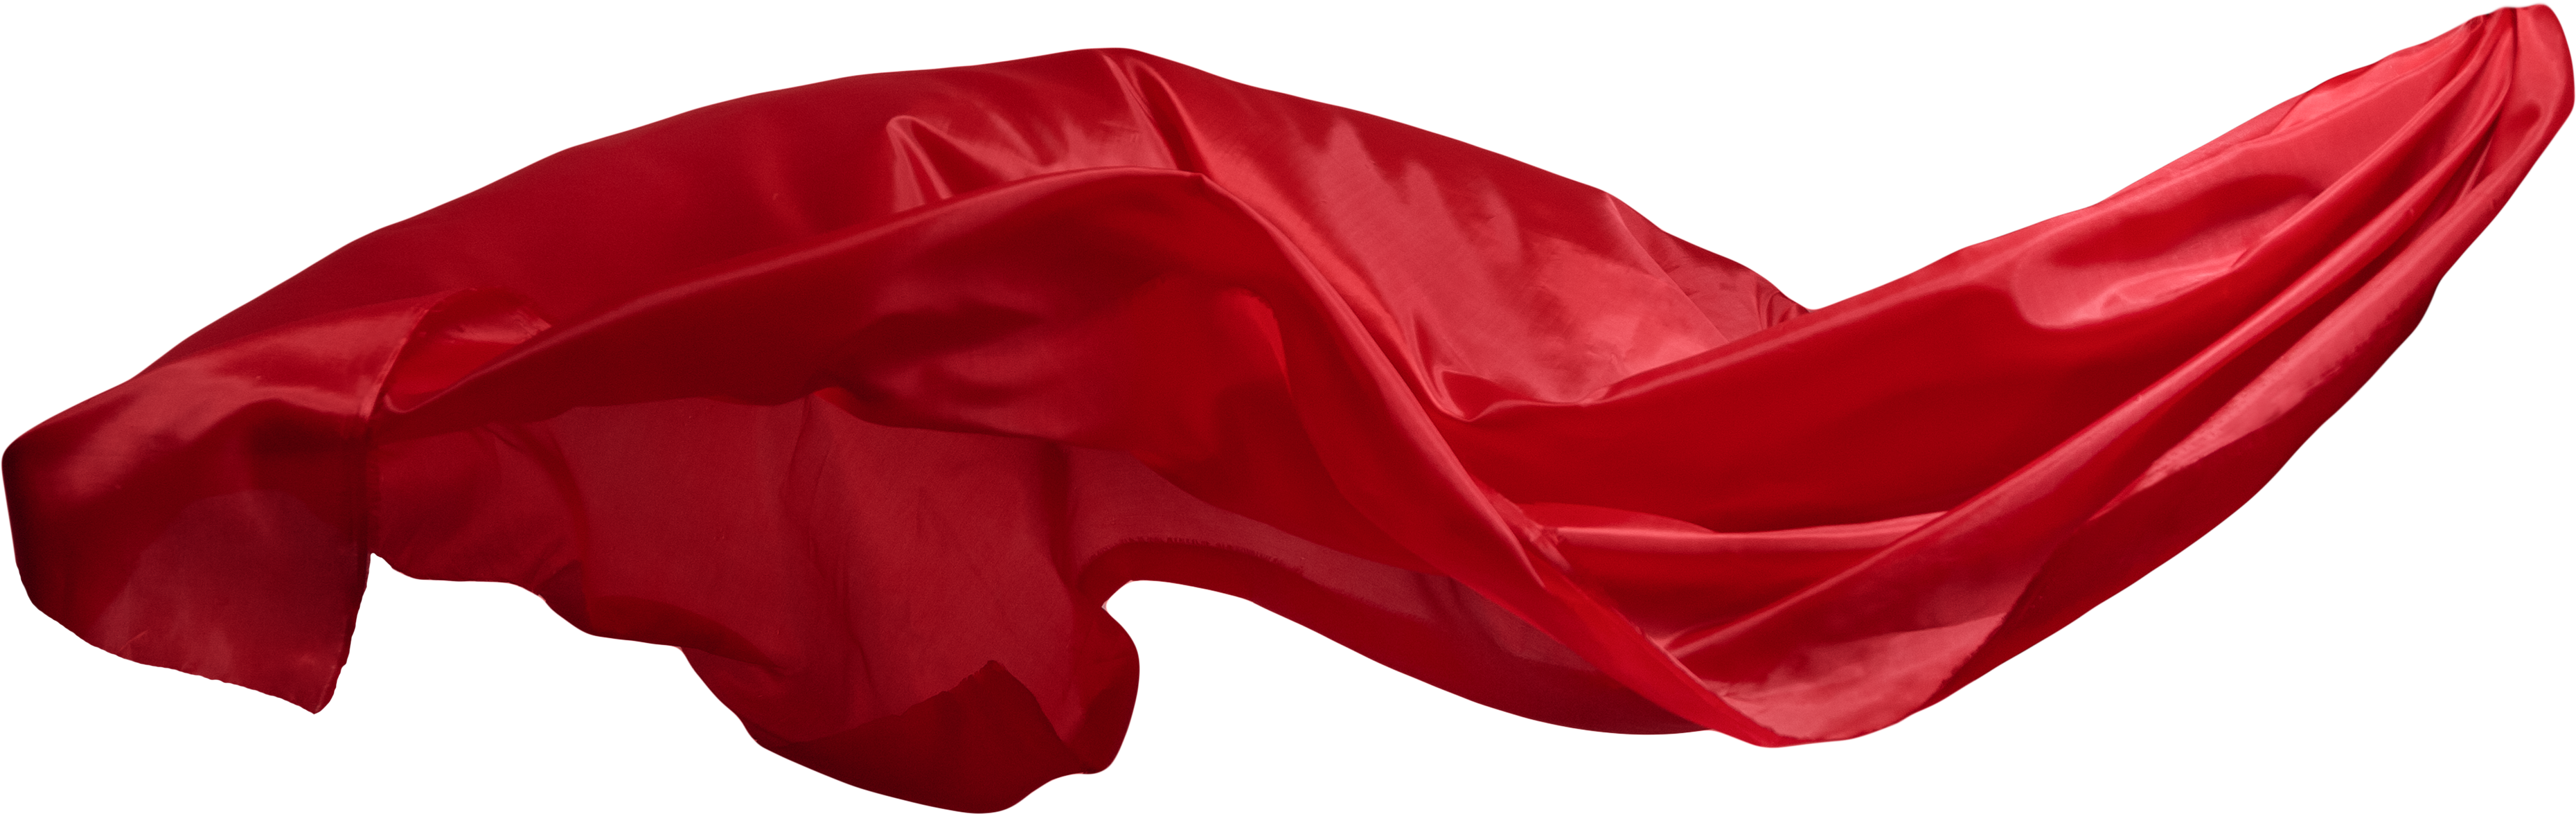 Red Satin Fabric Wave PNG